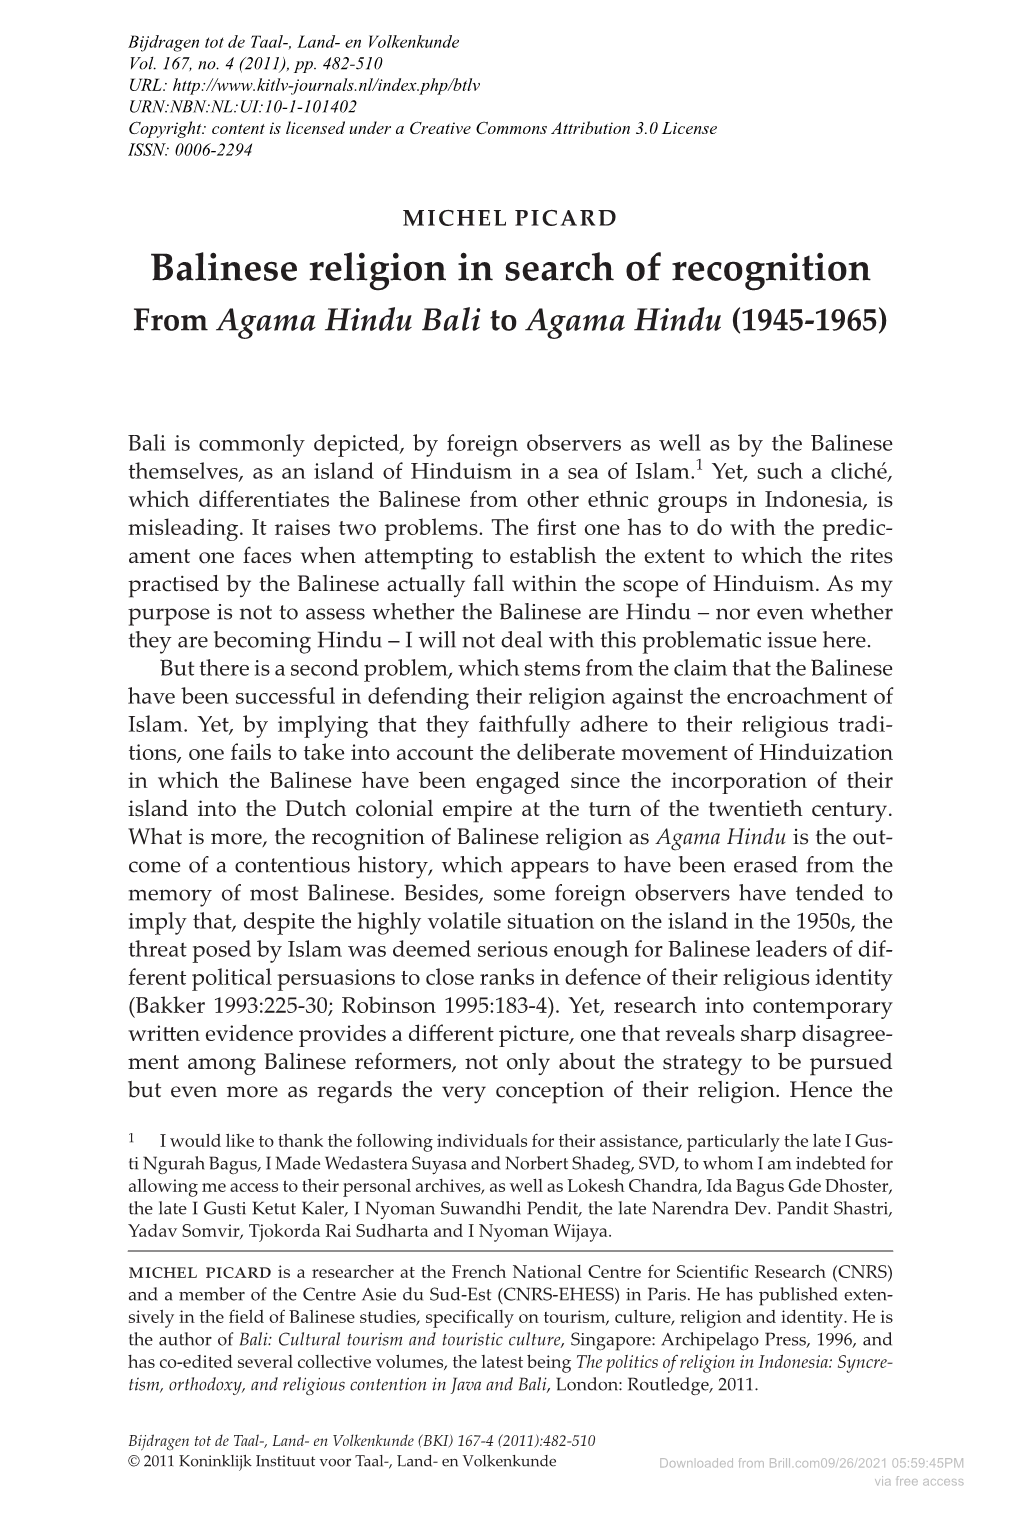 Balinese Religion in Search of Recognition from Agama Hindu Bali to Agama Hindu (1945-1965)